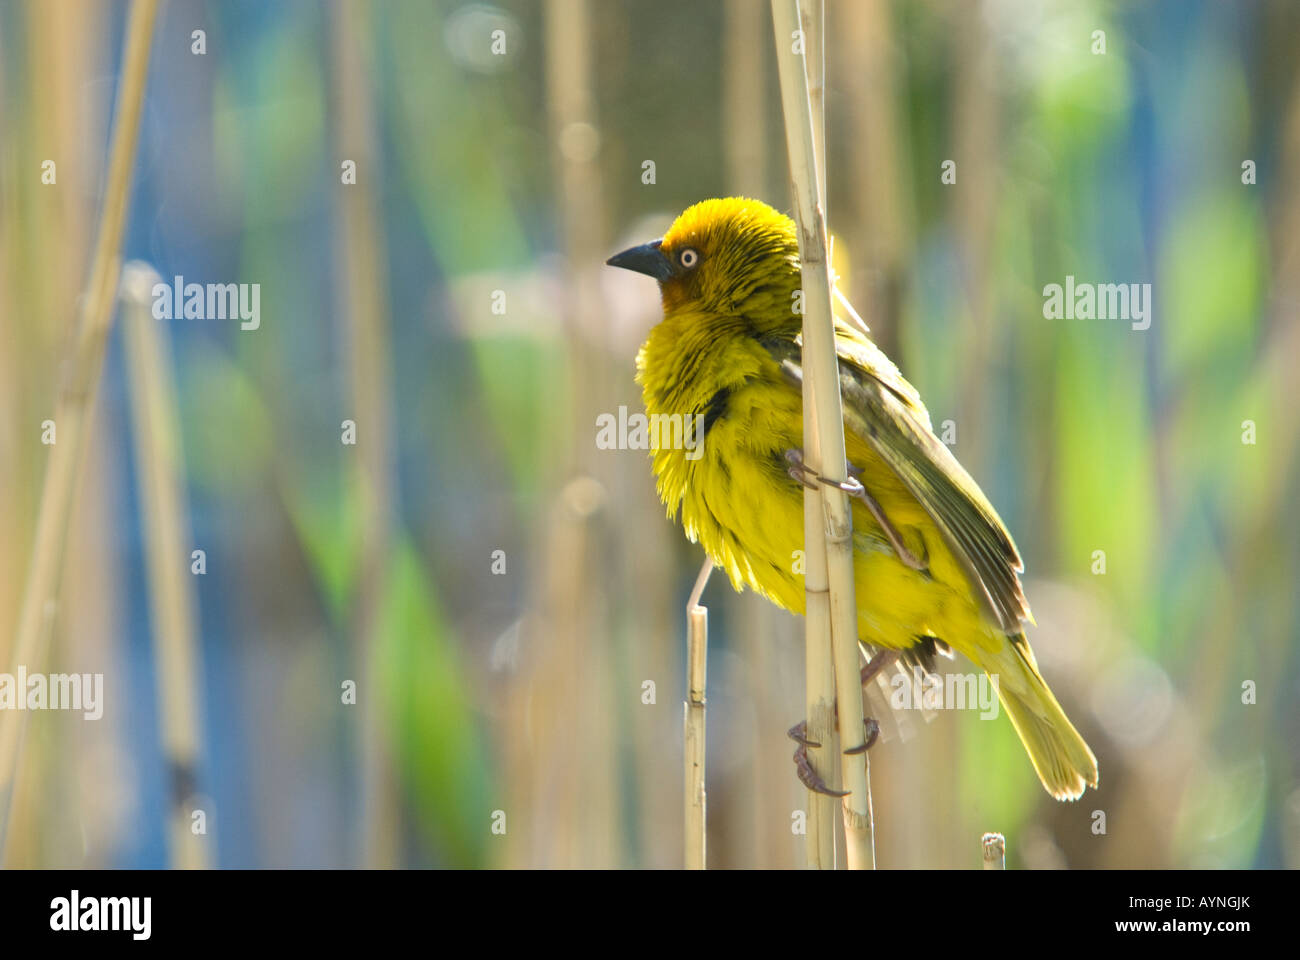 A cape weaver perched on a reed with water in the background Stock Photo